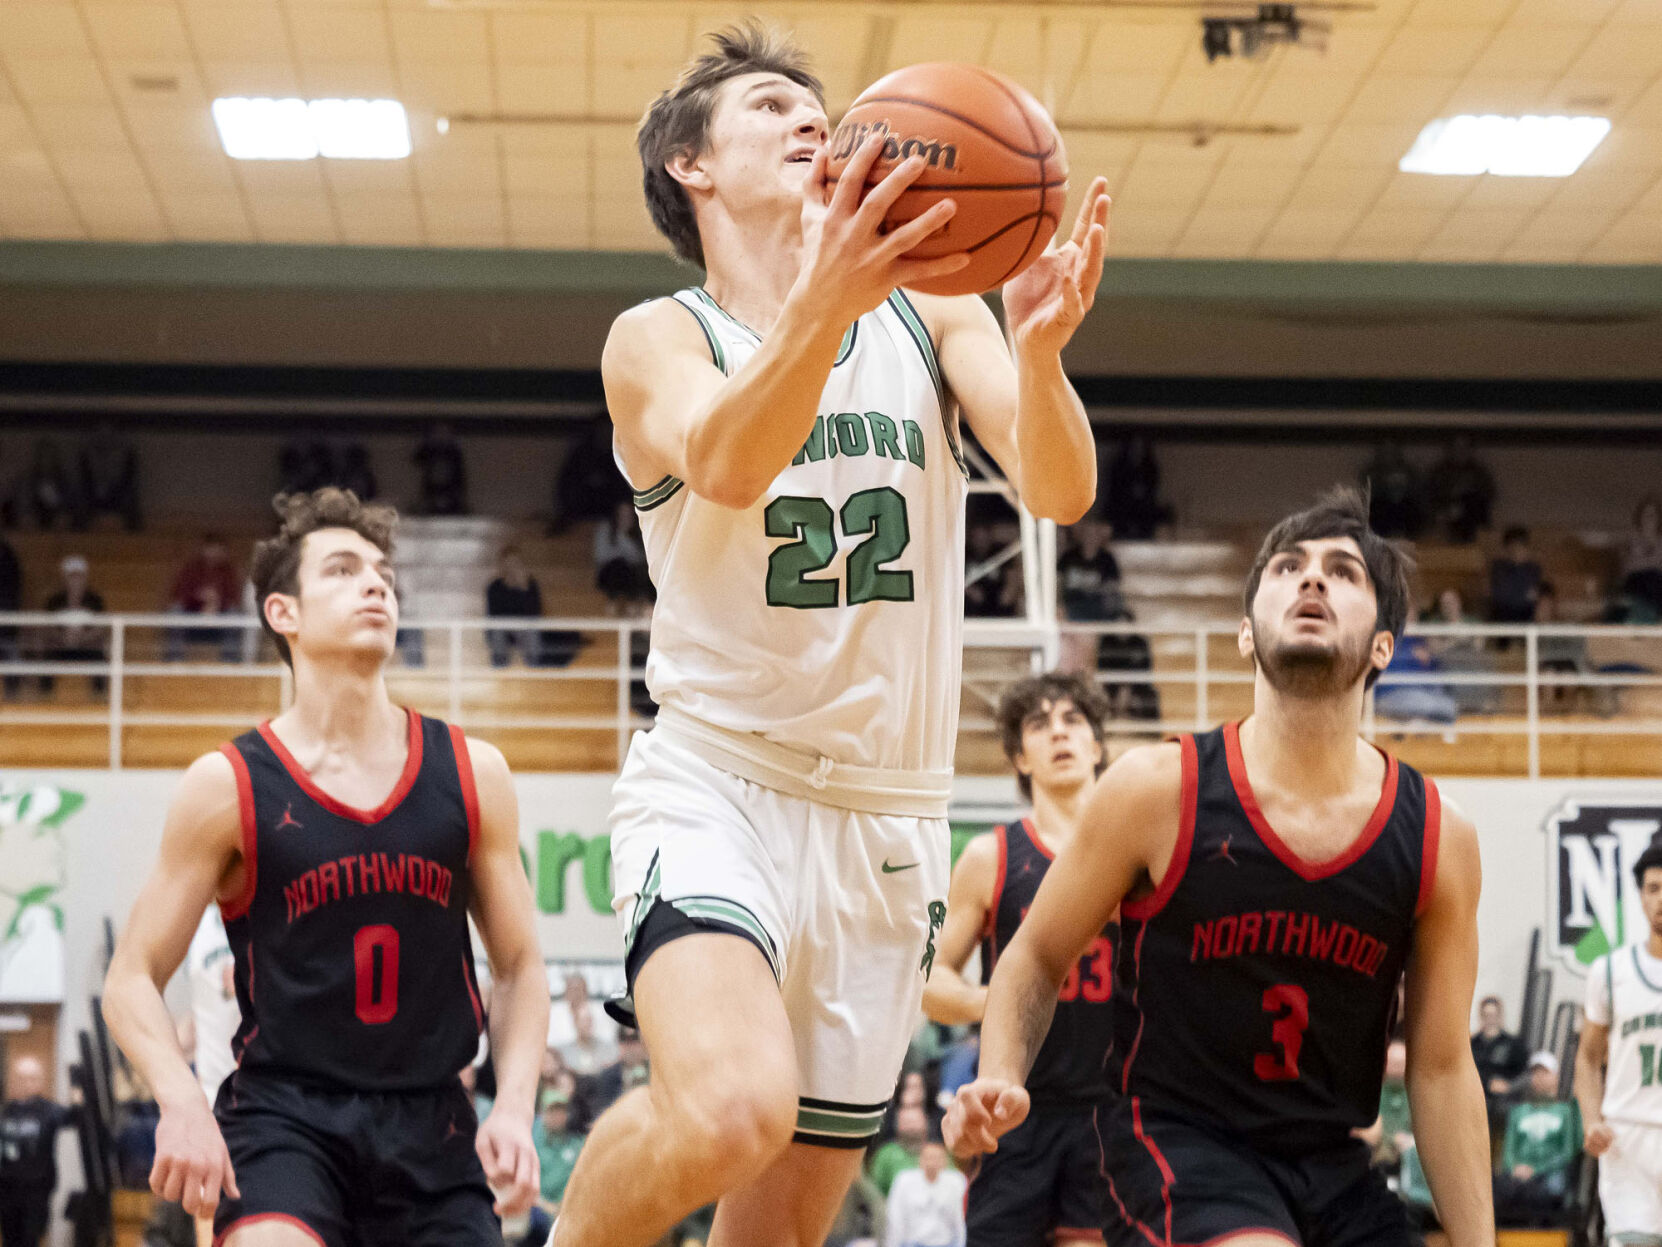 Concord Dominates Northwood in 47-29 Win: Lucas Prough leads with 27 points